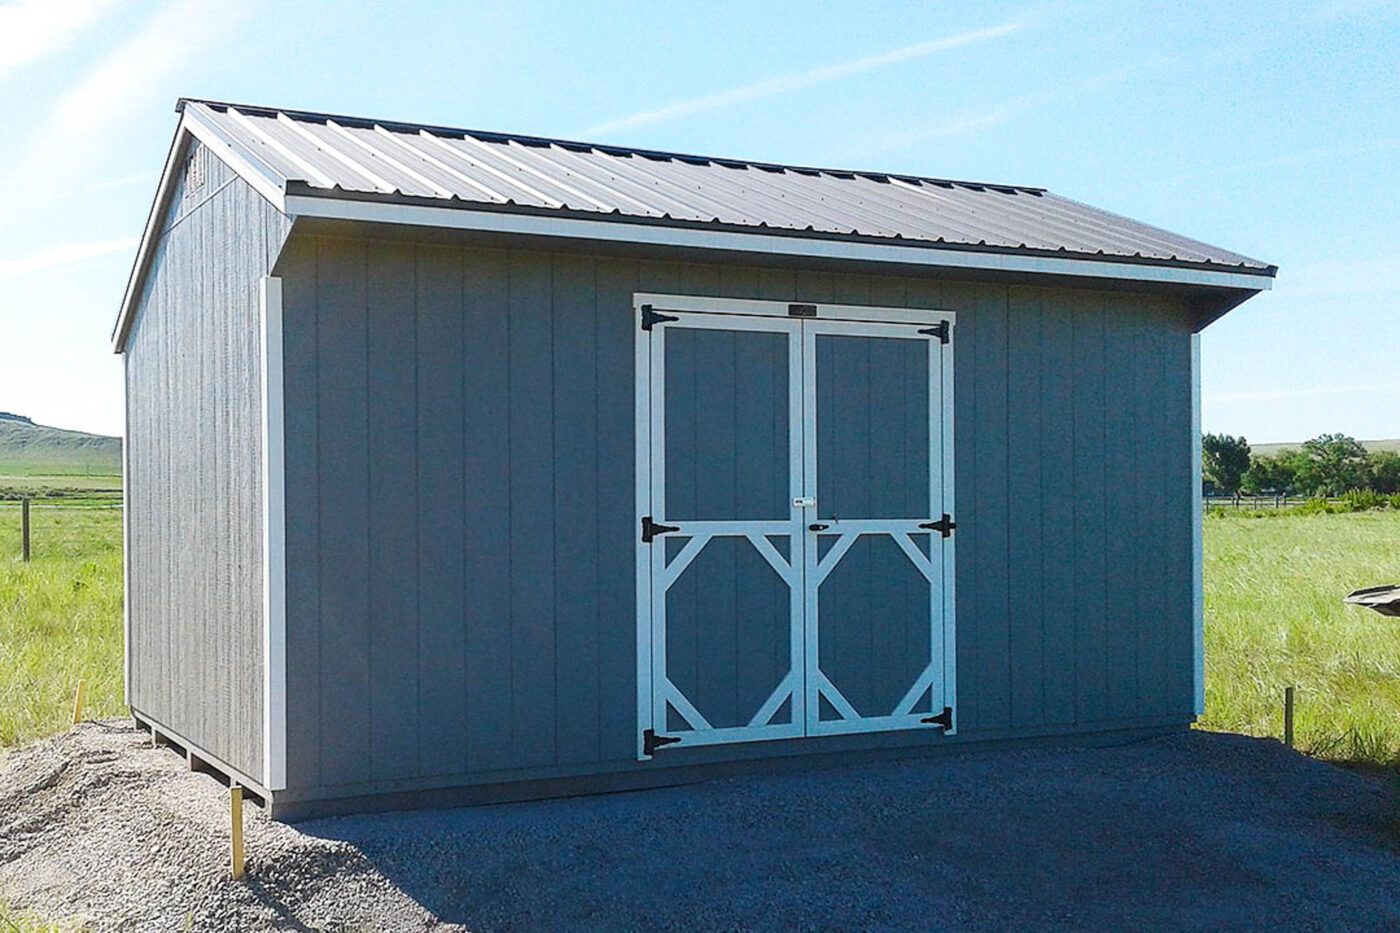 The quaker Storage Shed for sale in Montana